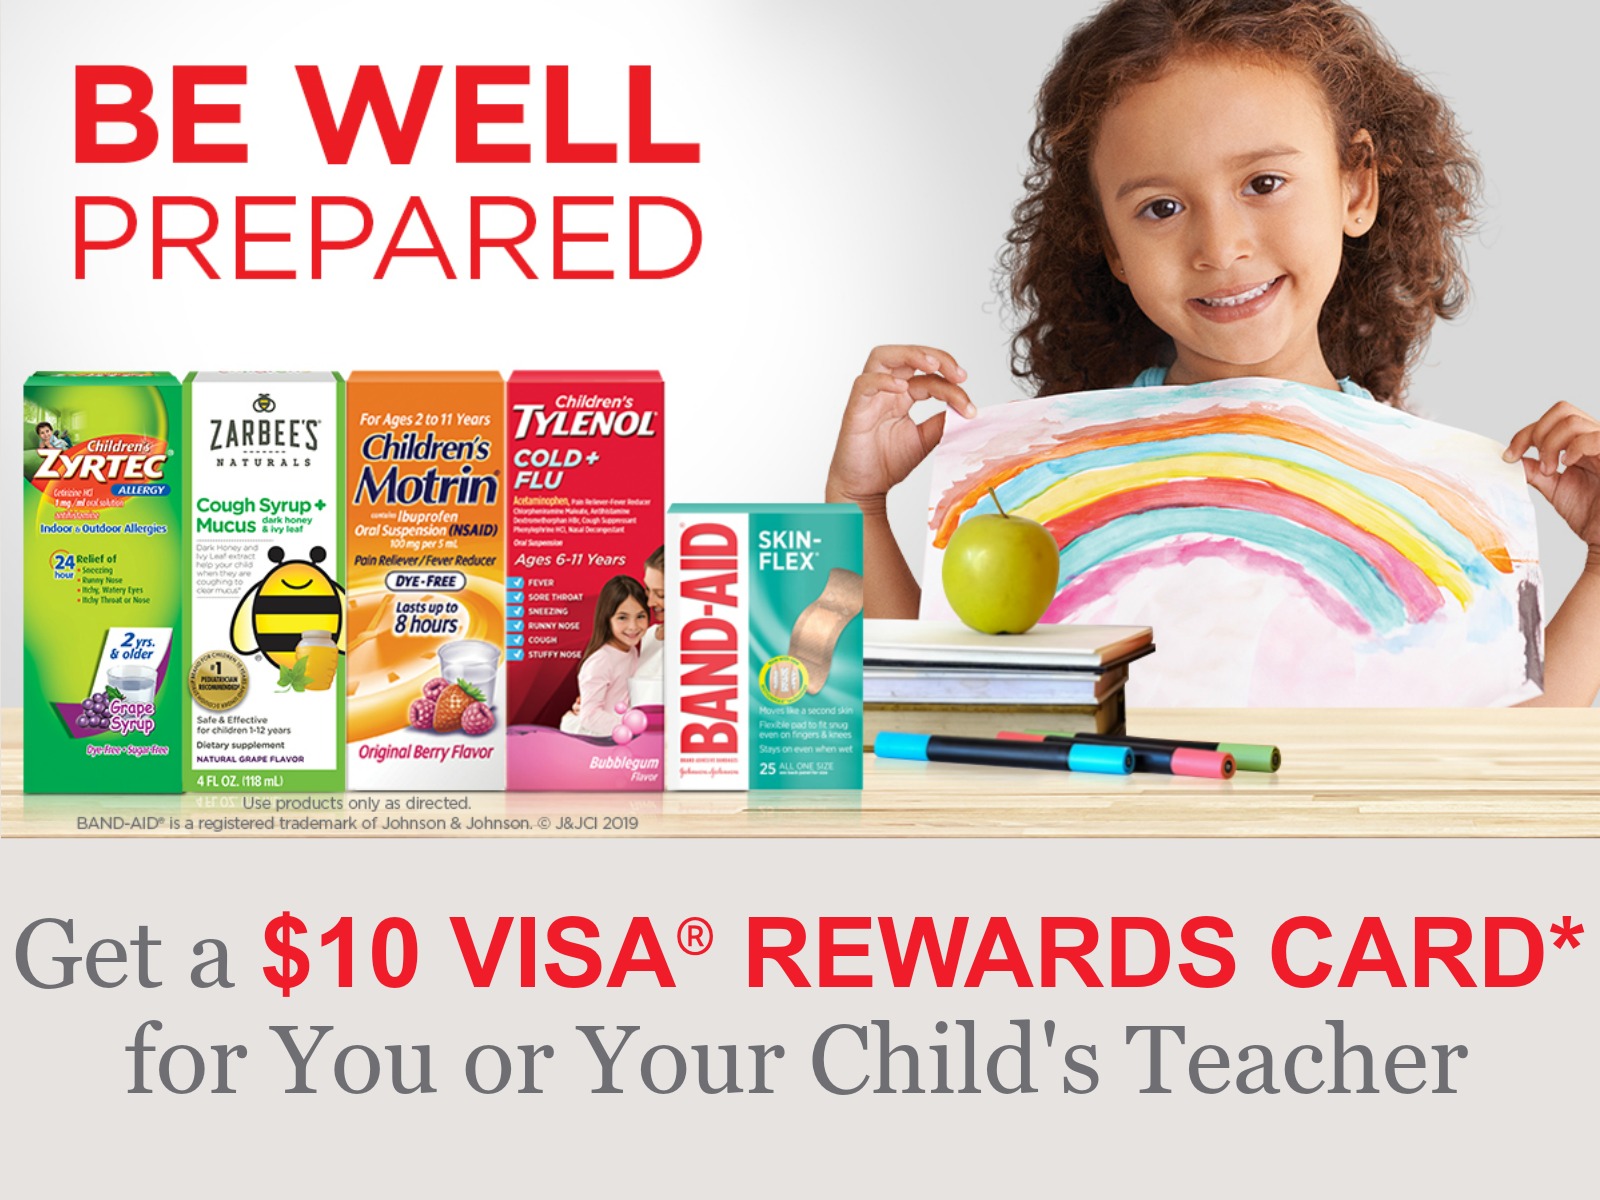 Still Time To Earn A $10 Reward Card With The Johnson & Johnson Be Well Prepared Offer